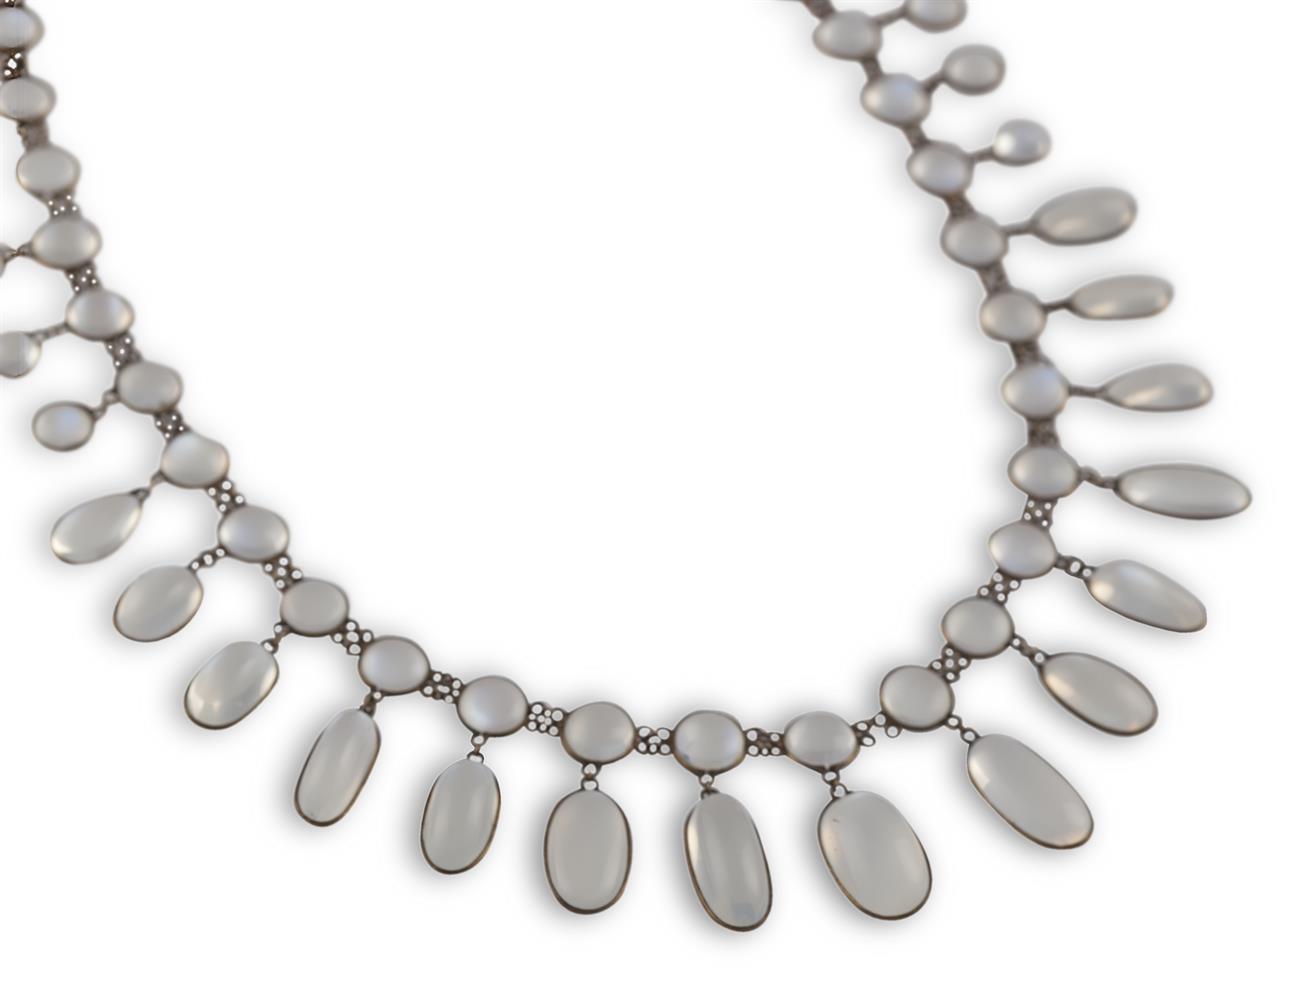 AN EARLY 20TH CENTURY MOONSTONE FRINGE NECKLACEComposed of a series of circular and oval cabochon